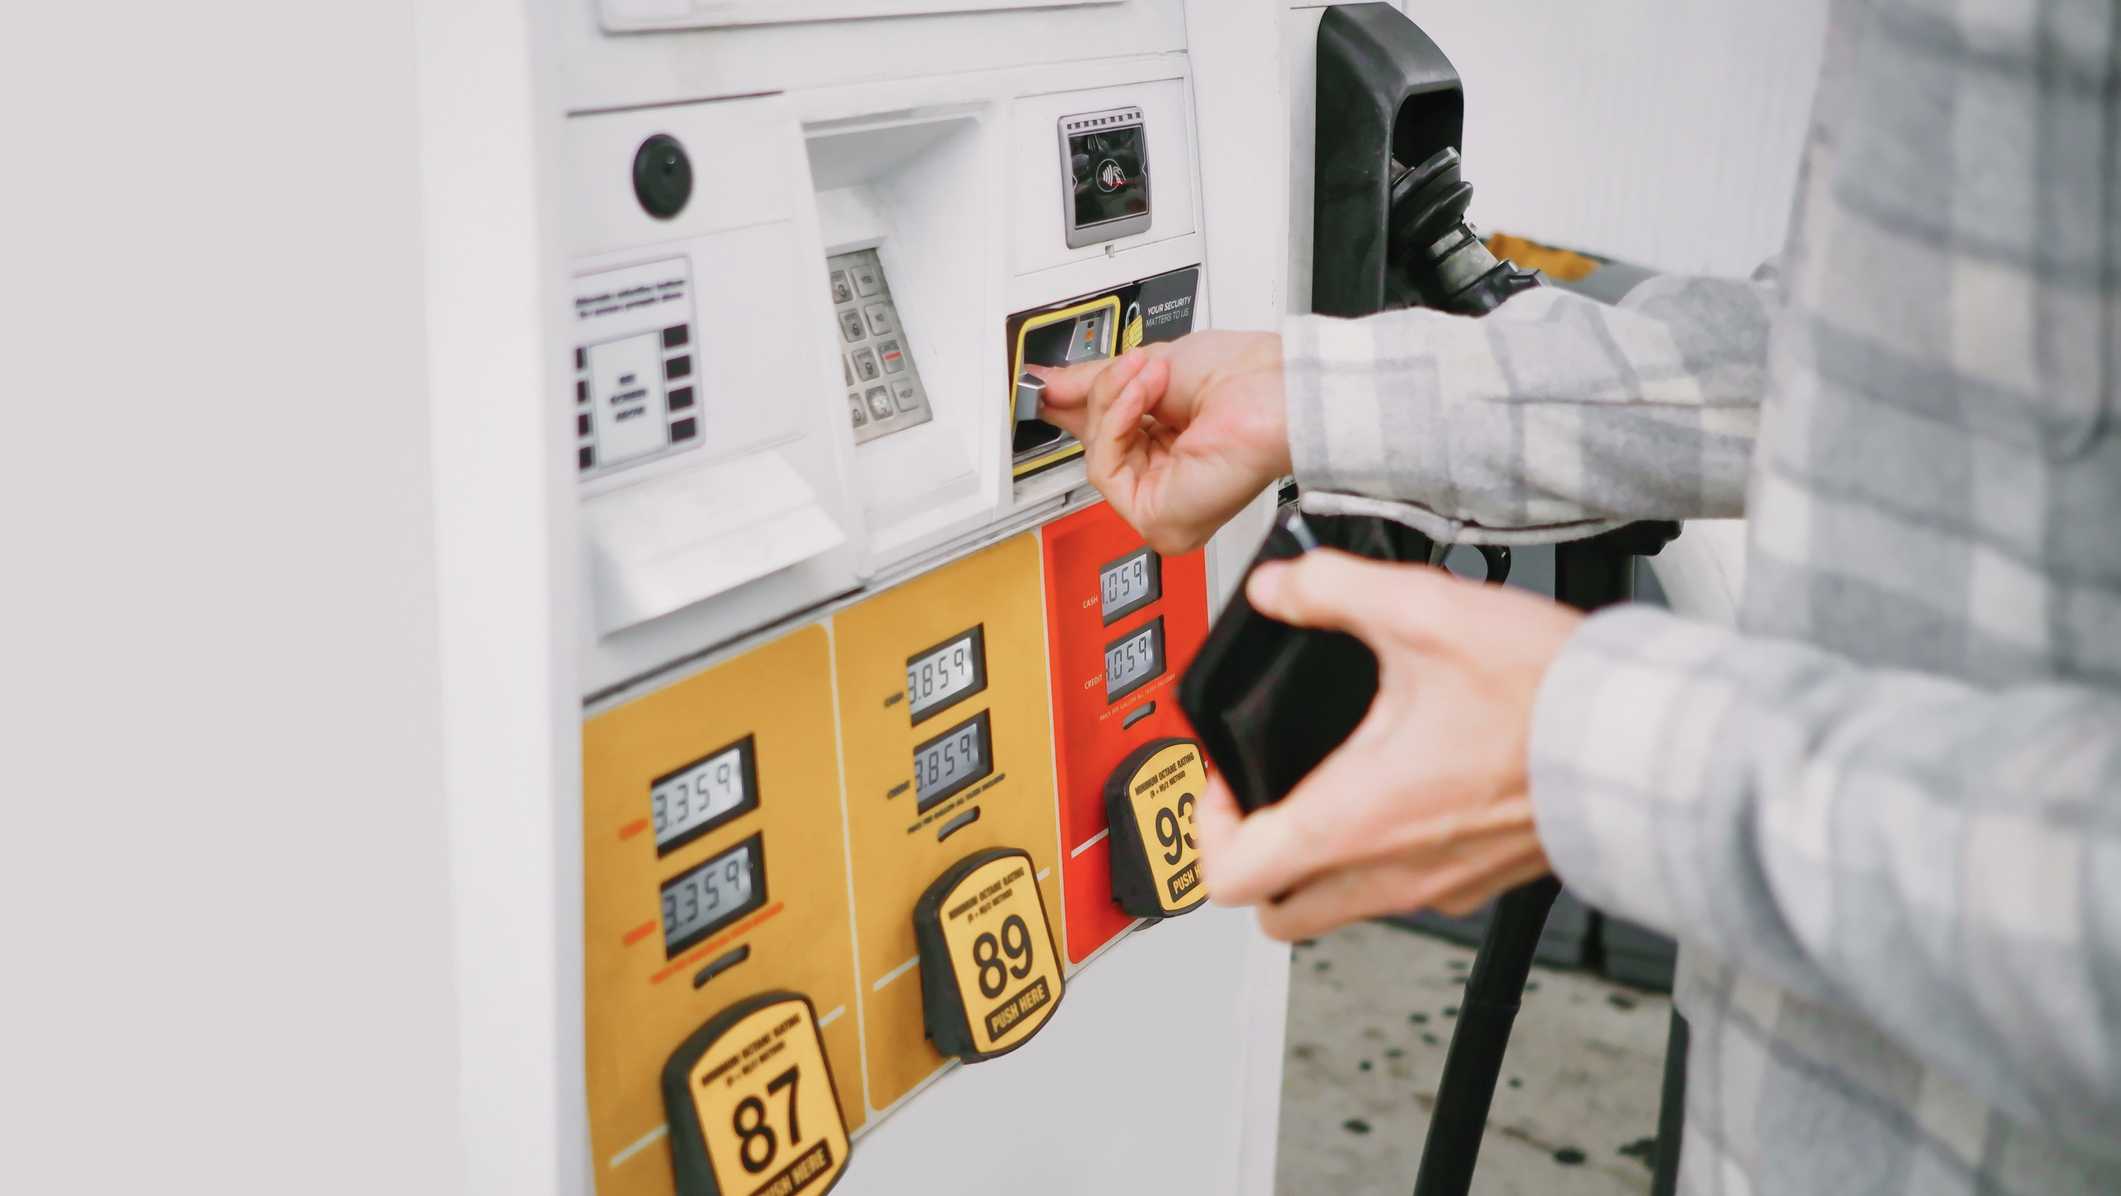 National gas price could drop below $4 per gallon, experts say